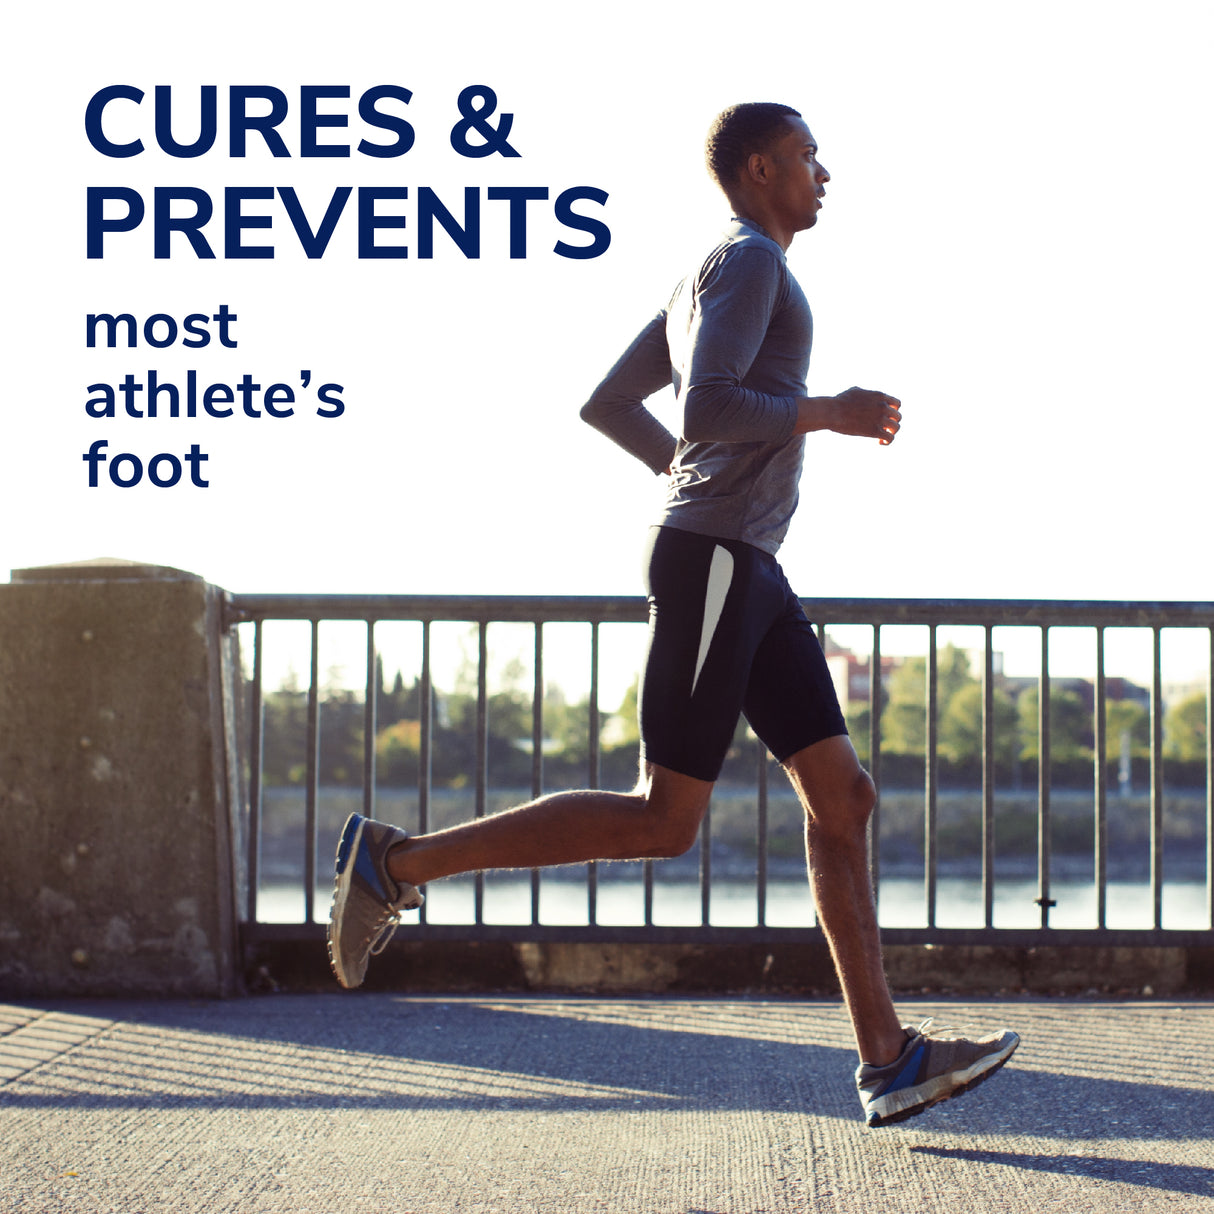 image of cures and prevents most athlete's foot